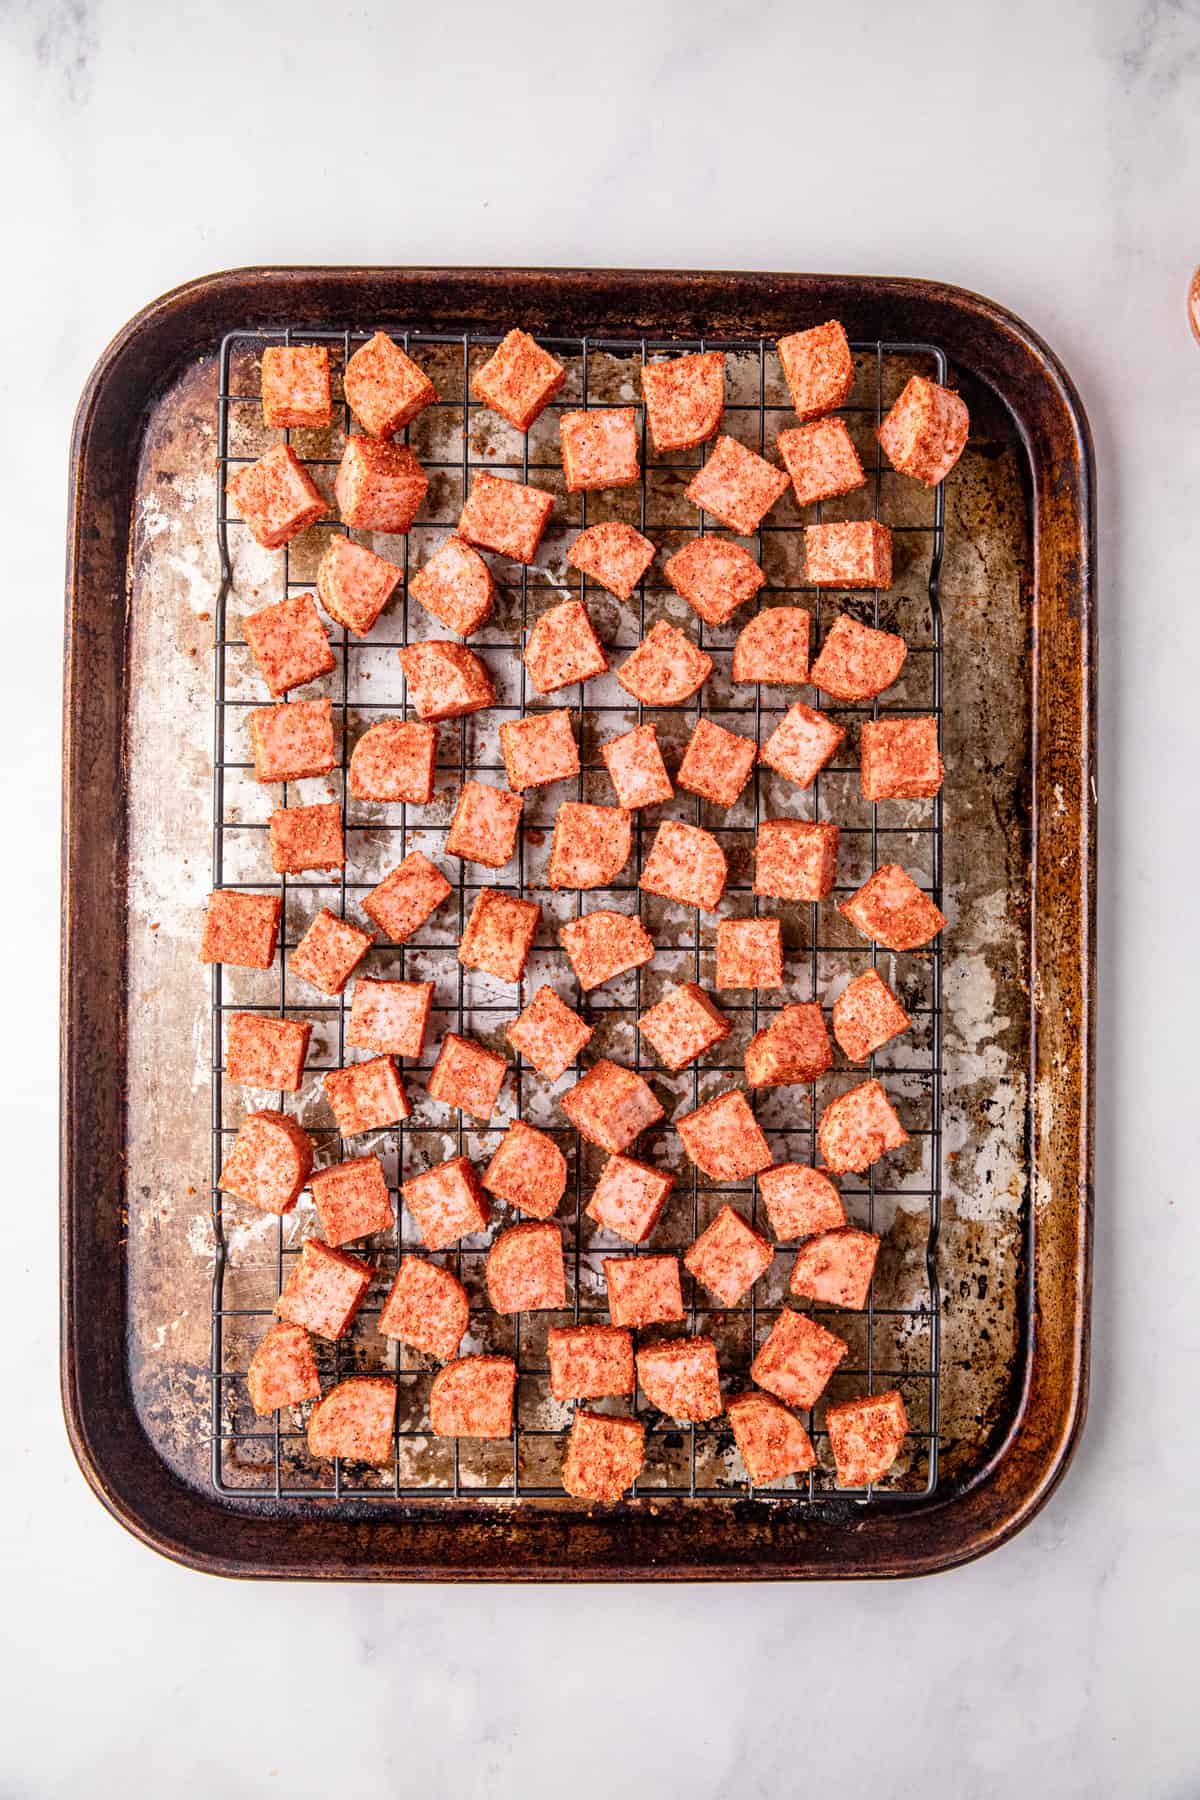 Arranging seasoned Spam pieces on cooking grate on cooking sheet  for Spam Burnt Ends recipe